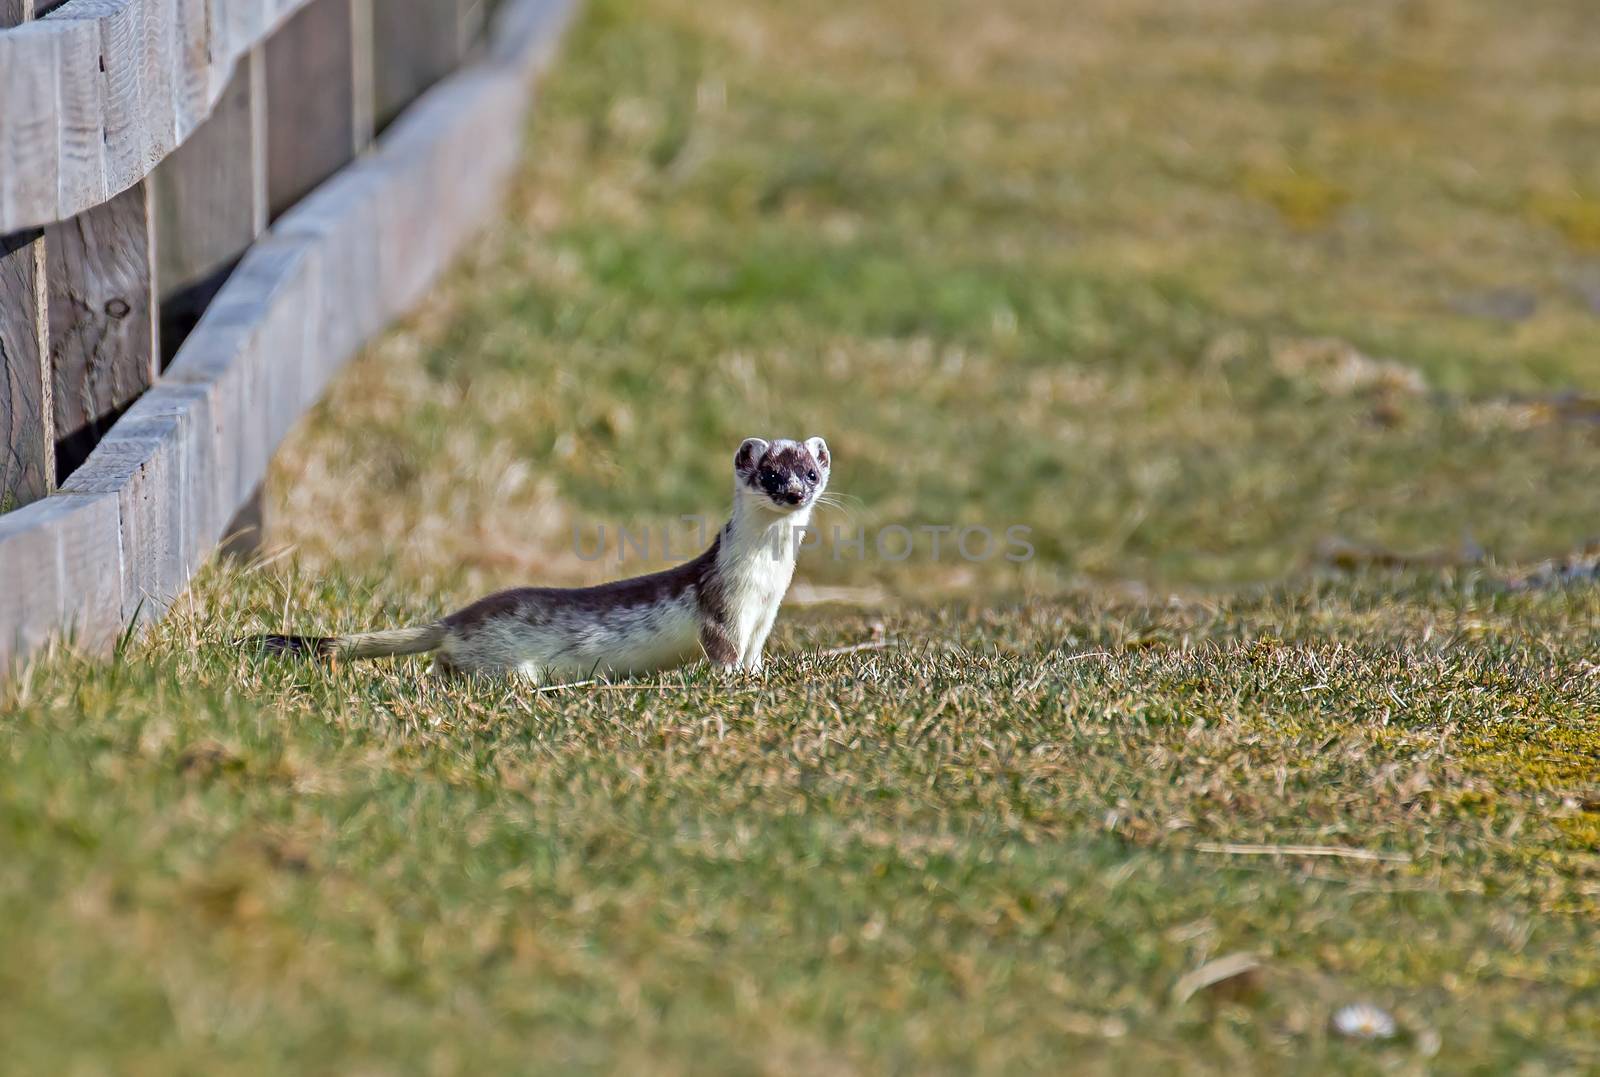 Stoat watching, still in partial white winter coat.